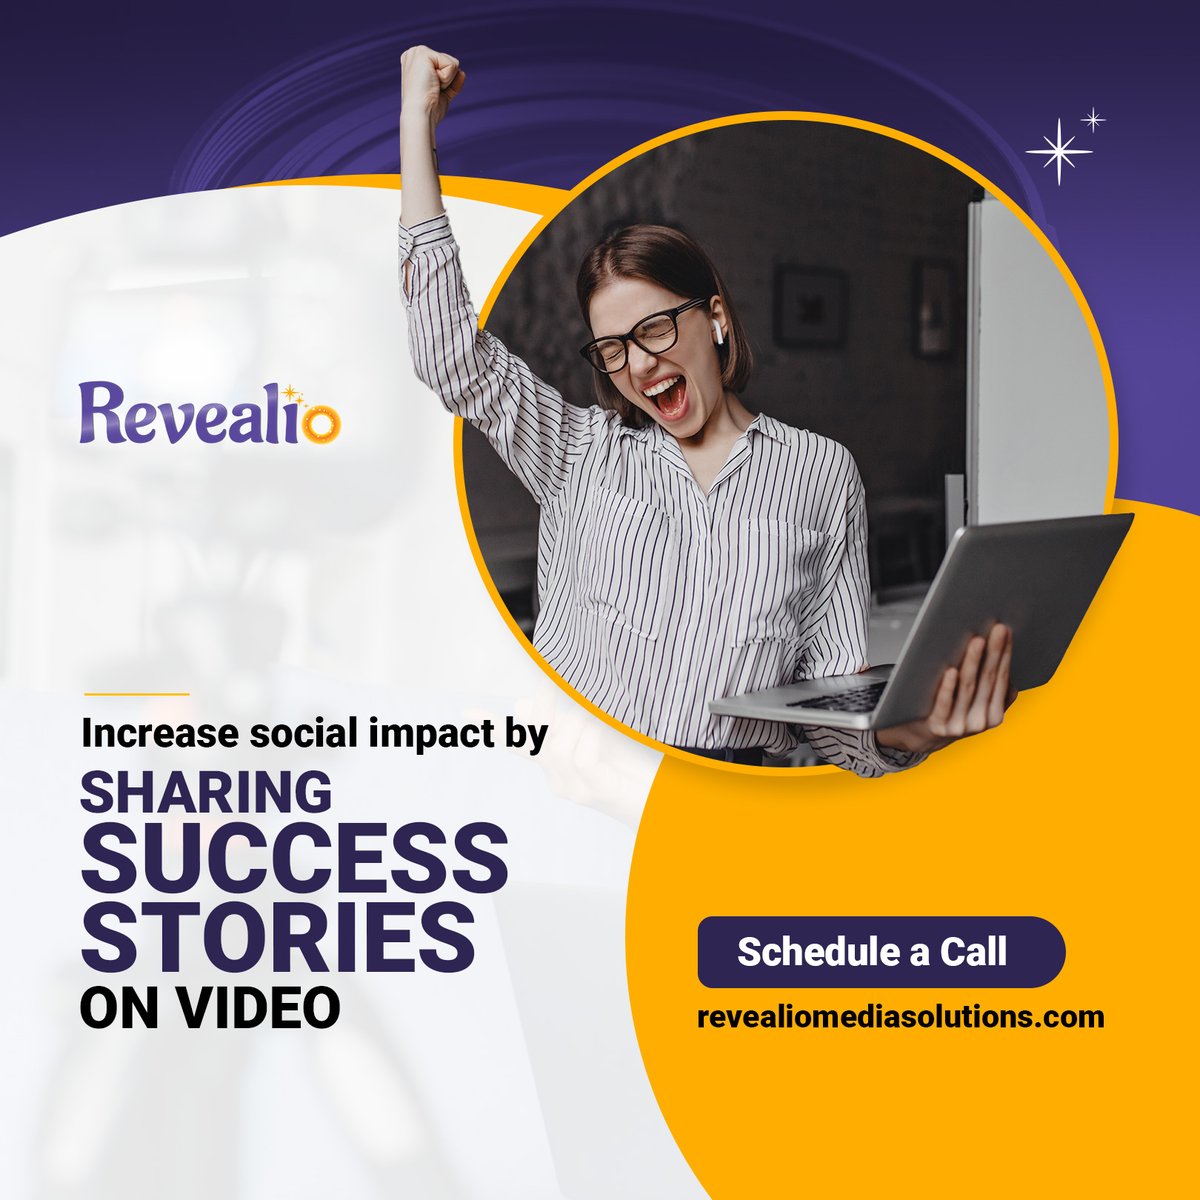 Increase your impact by sharing your success stories on video now! 

REVEALiO gives you the power to do it! 

#video #story #videostorytelling #smallbusinessvideo #nonprofitvideo #purposedriven #innovativestorytelling #revealio #uniquebusiness #storytelling #shortvideo